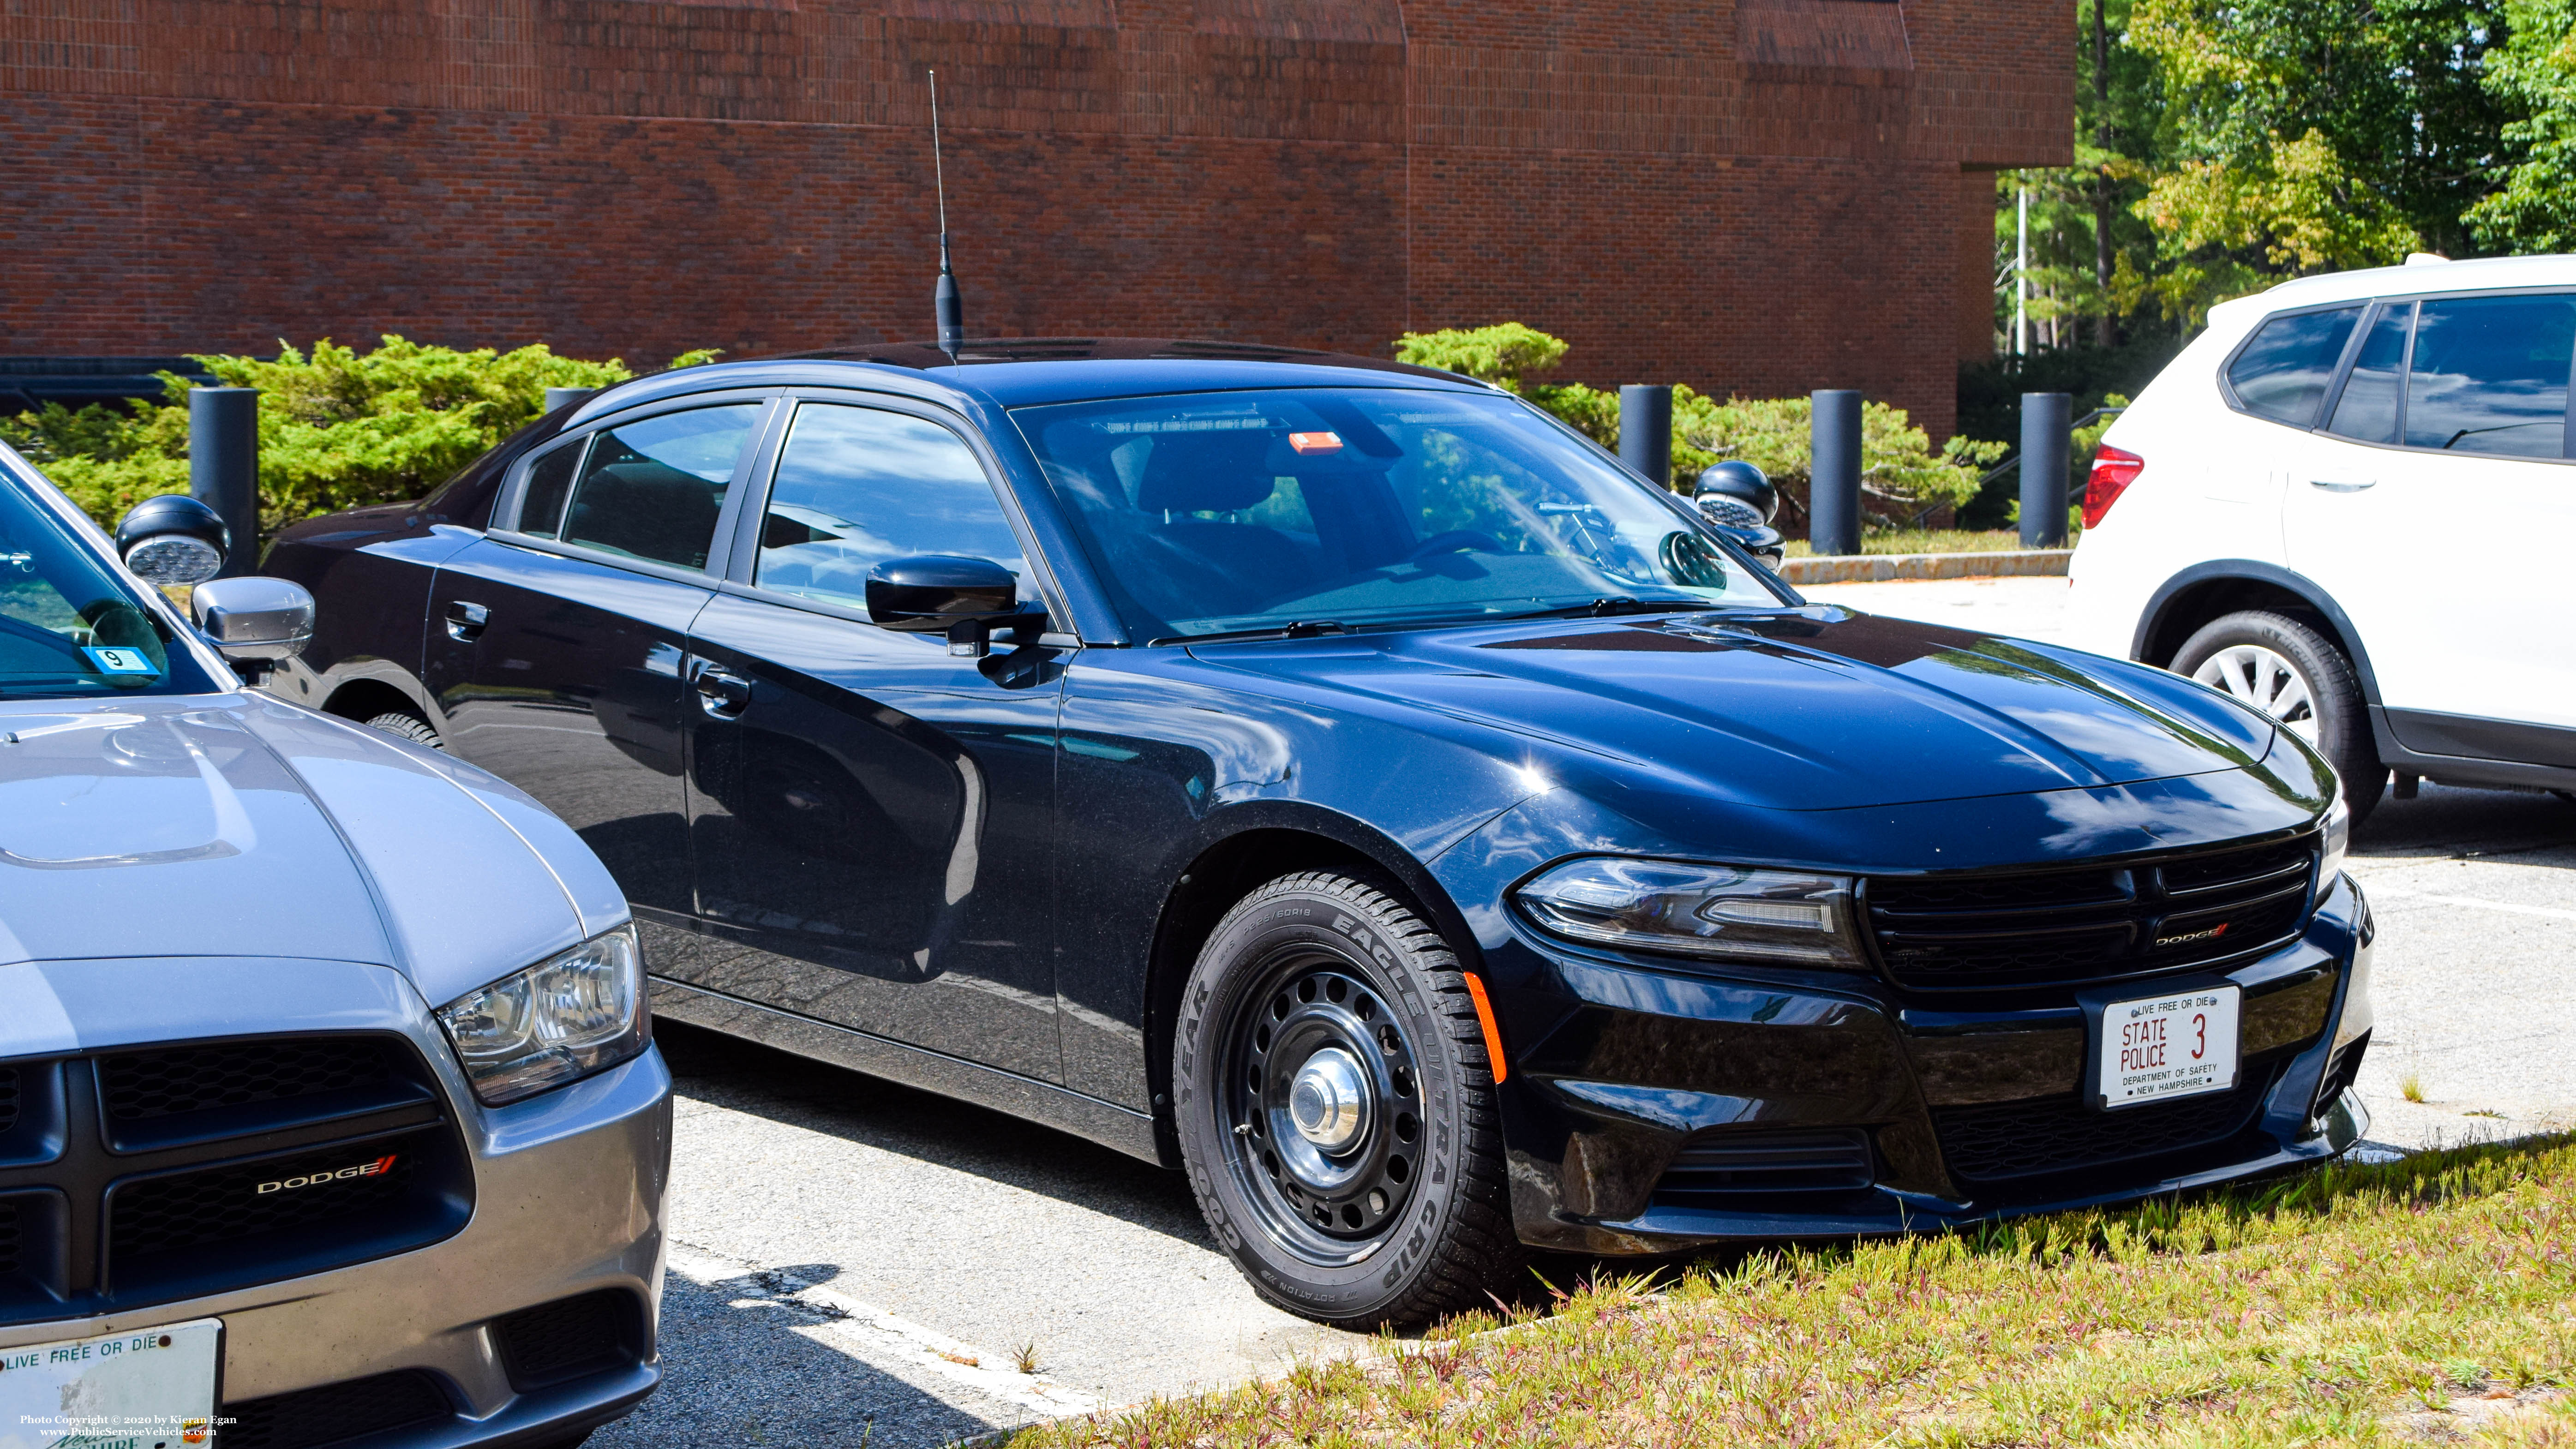 A photo  of New Hampshire State Police
            Cruiser 3, a 2015-2019 Dodge Charger             taken by Kieran Egan